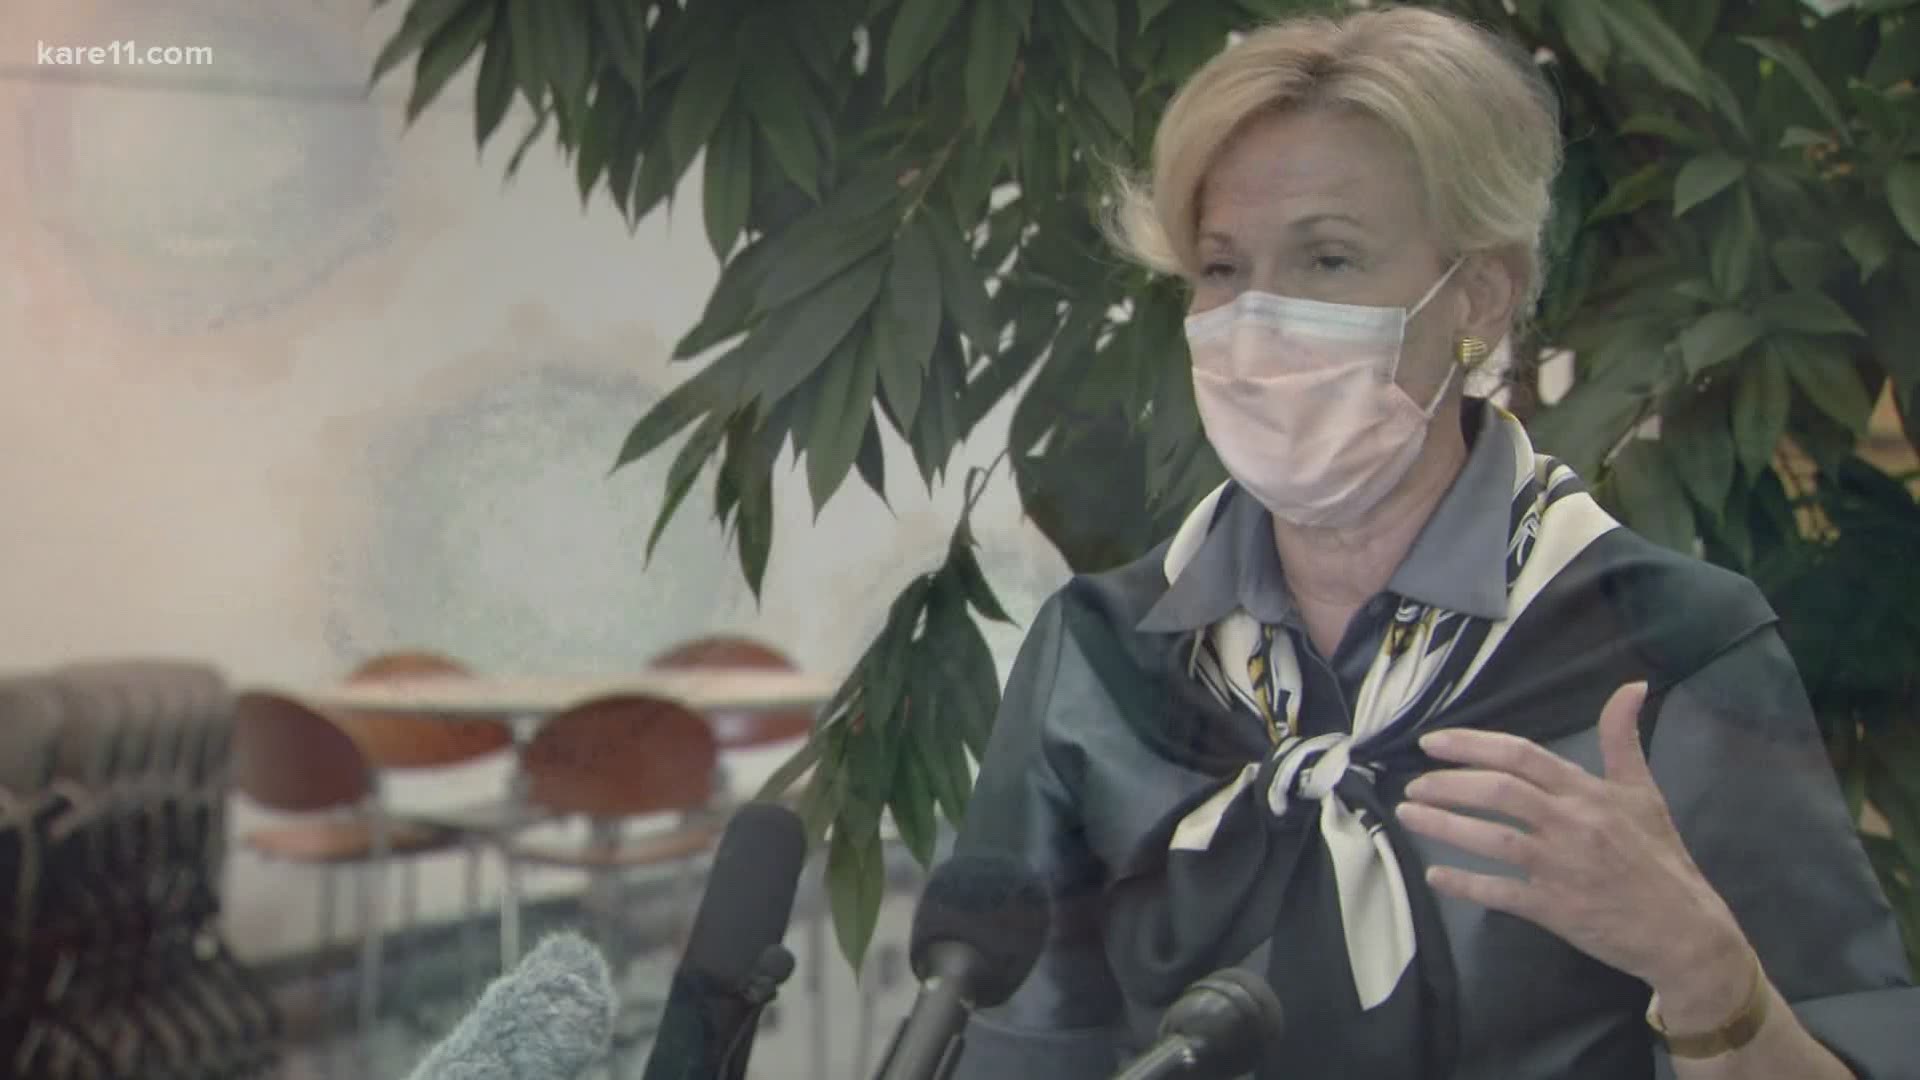 Dr. Deborah Birx says Minnesotans need more mask-wearing when with friends and family members